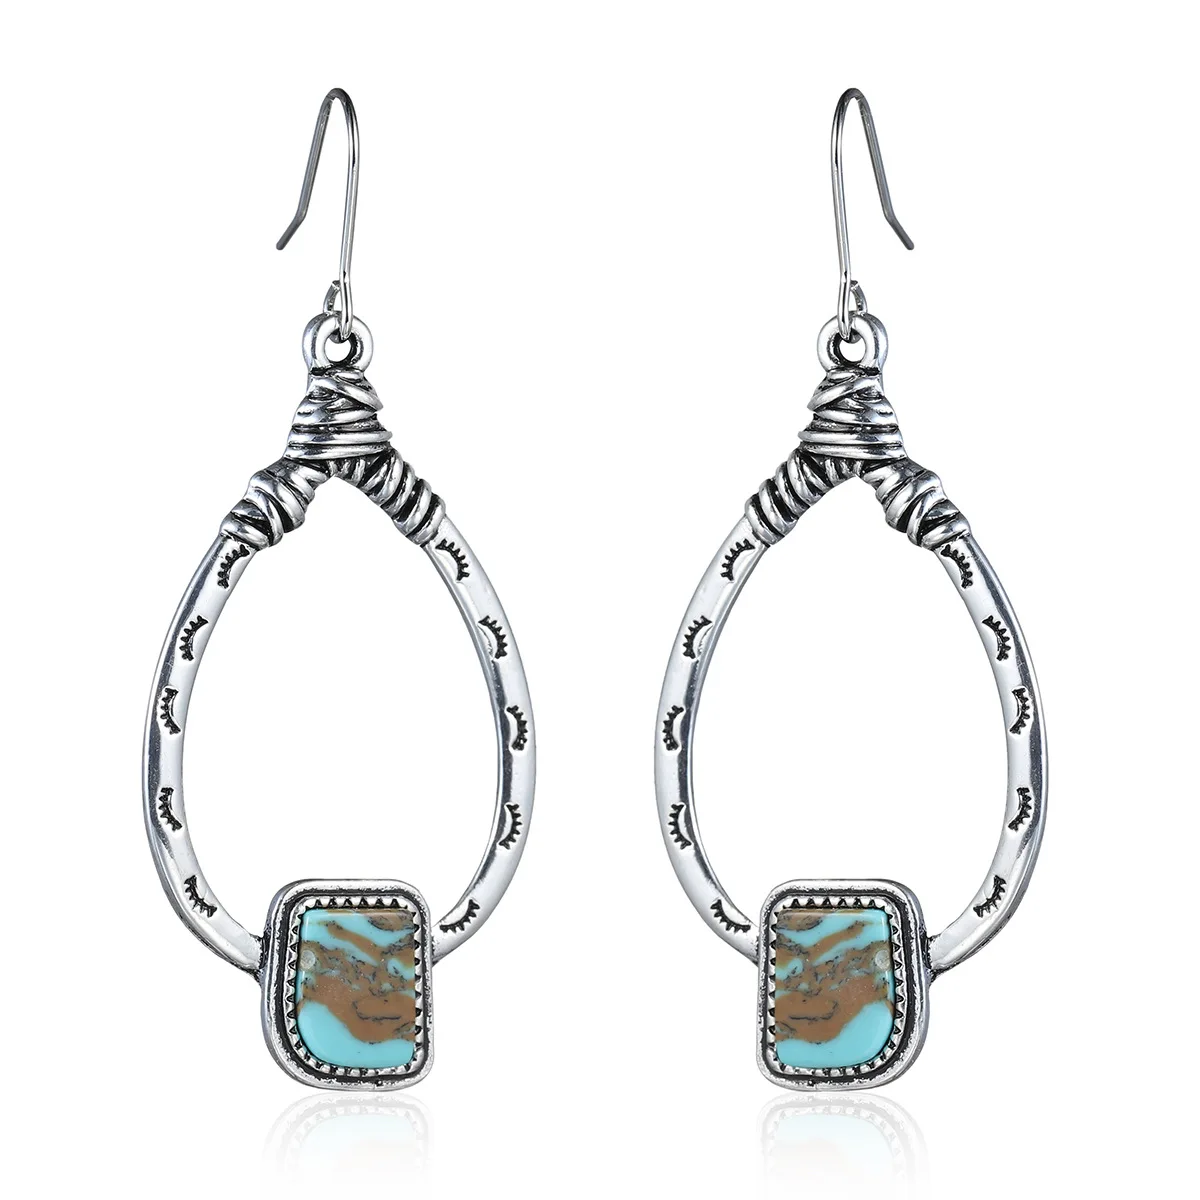 

Bohemian Jewelry 925 Antique Silver Carved Eyelashes Turquoise Earrings Handmade Large Hoop Drop Earrings For Women